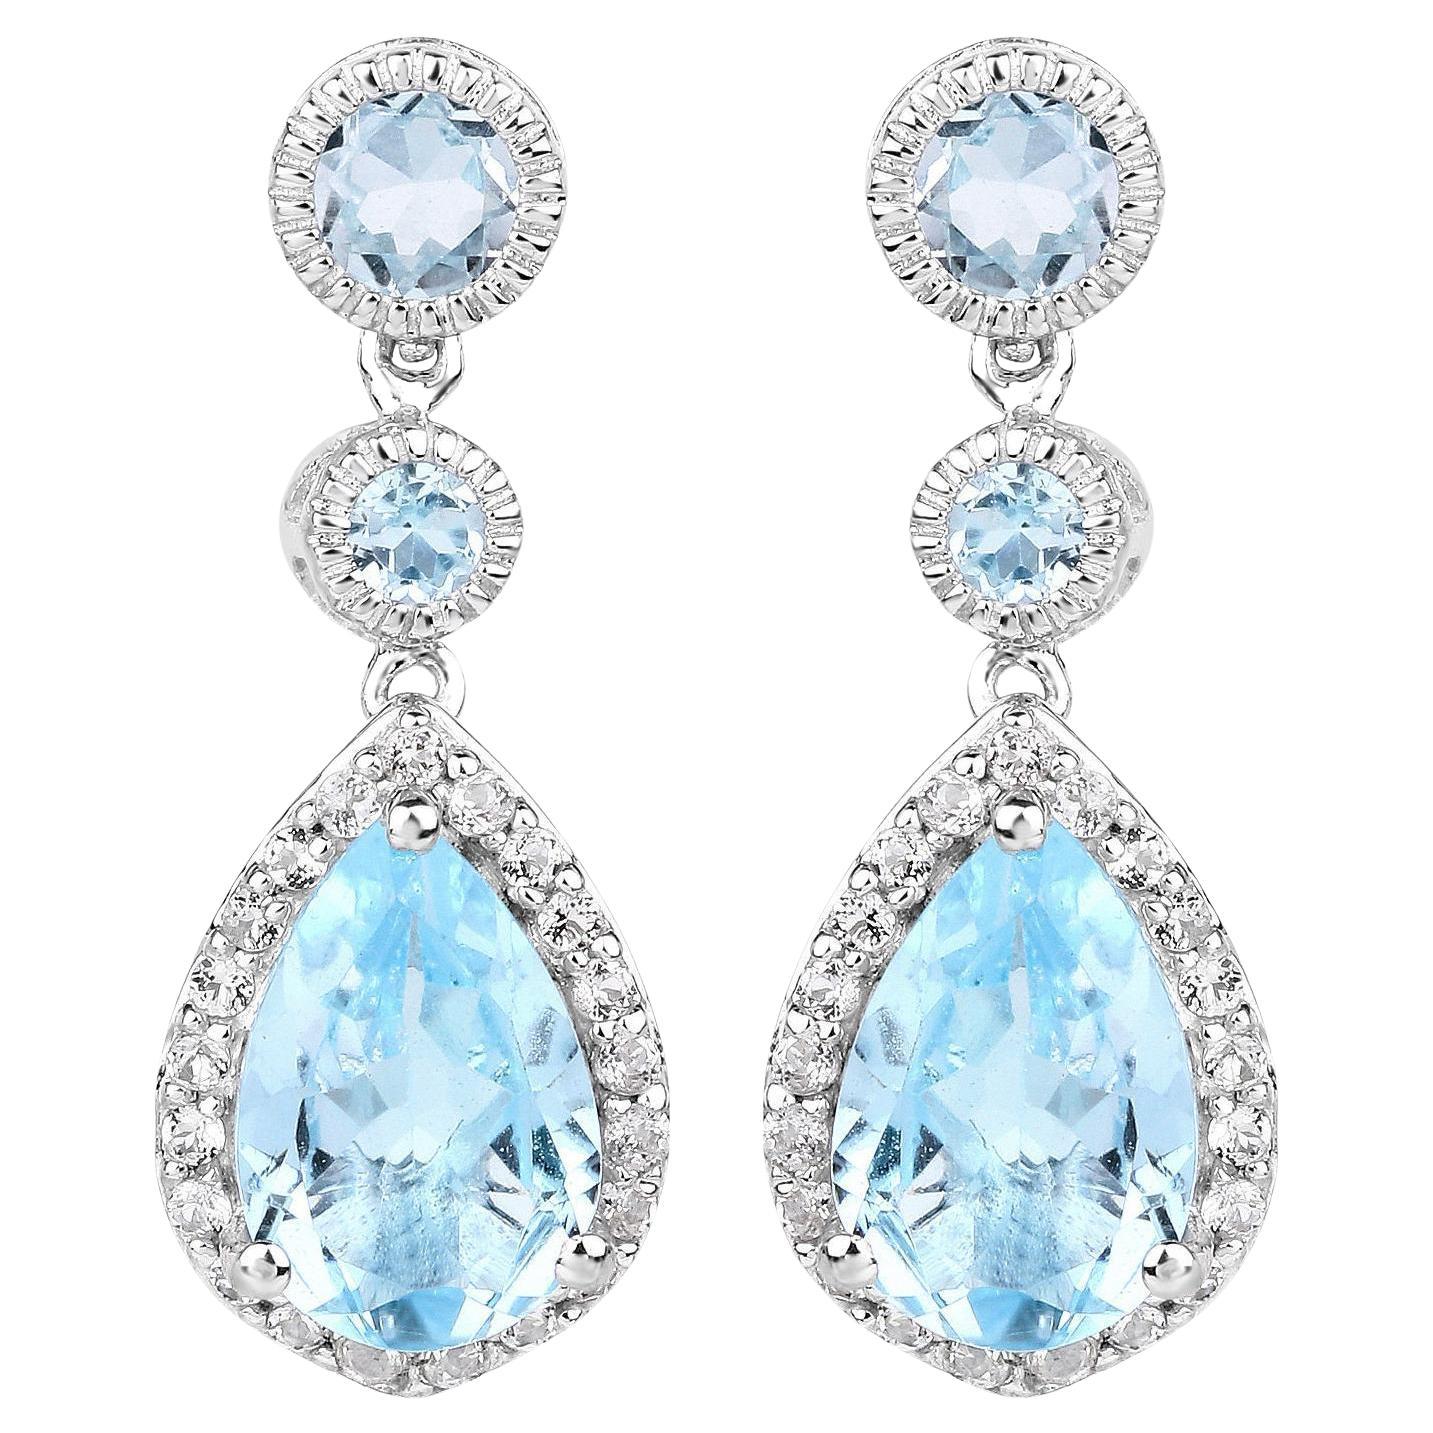 Swiss Blue Topaz Dangle Earrings With White Topaz 9.46 Carats For Sale